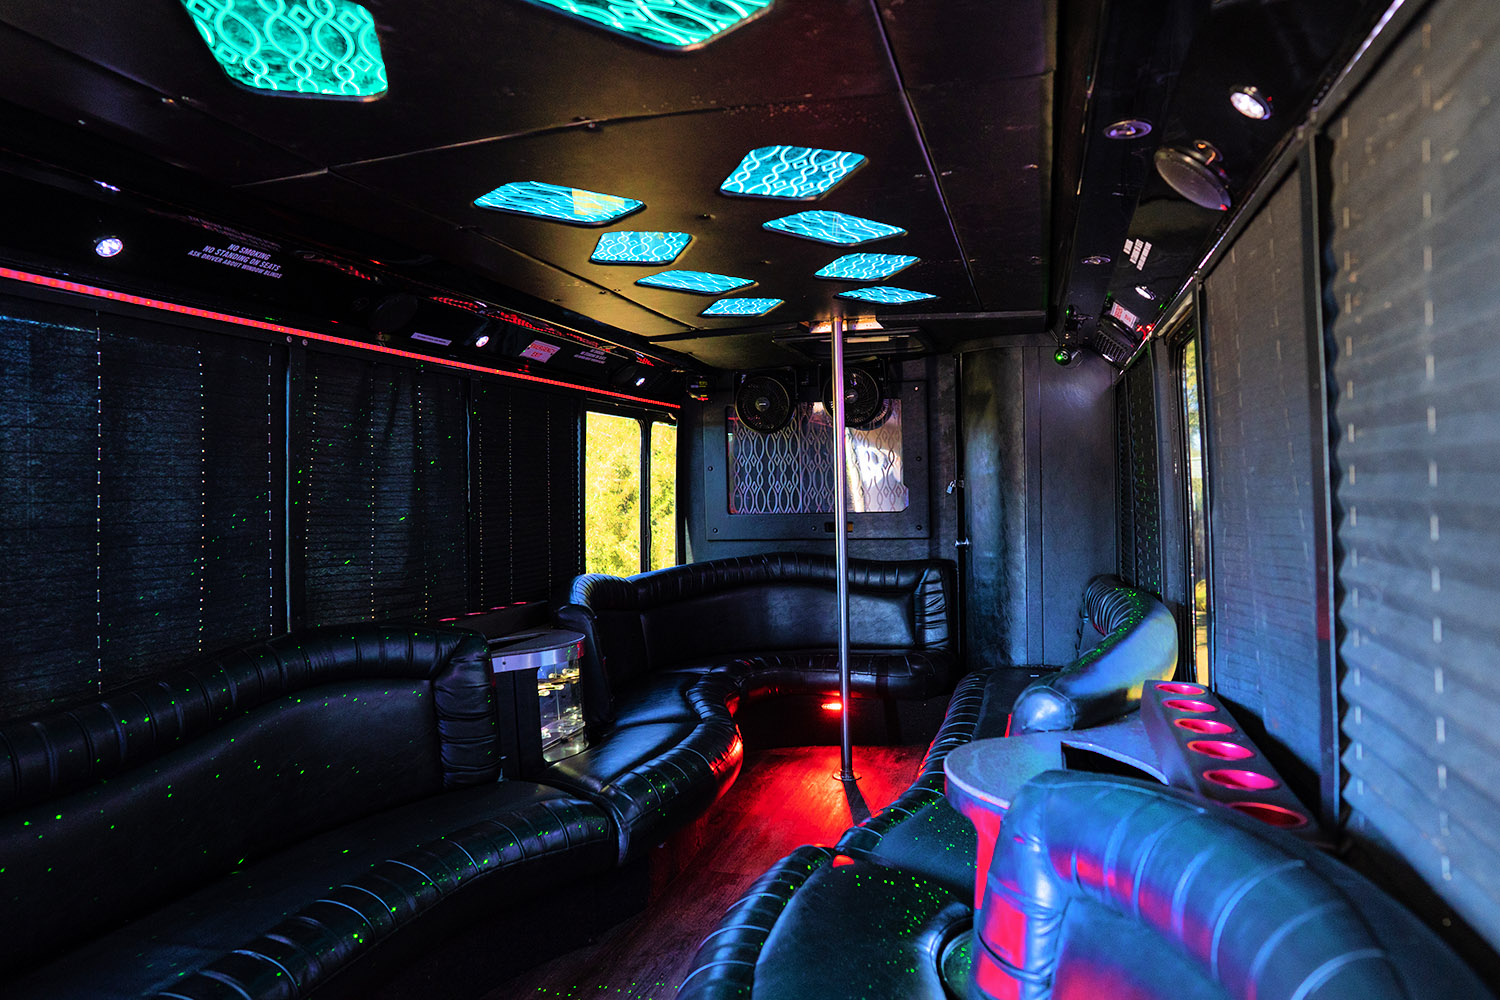 Inside the small party bus with neons and pole